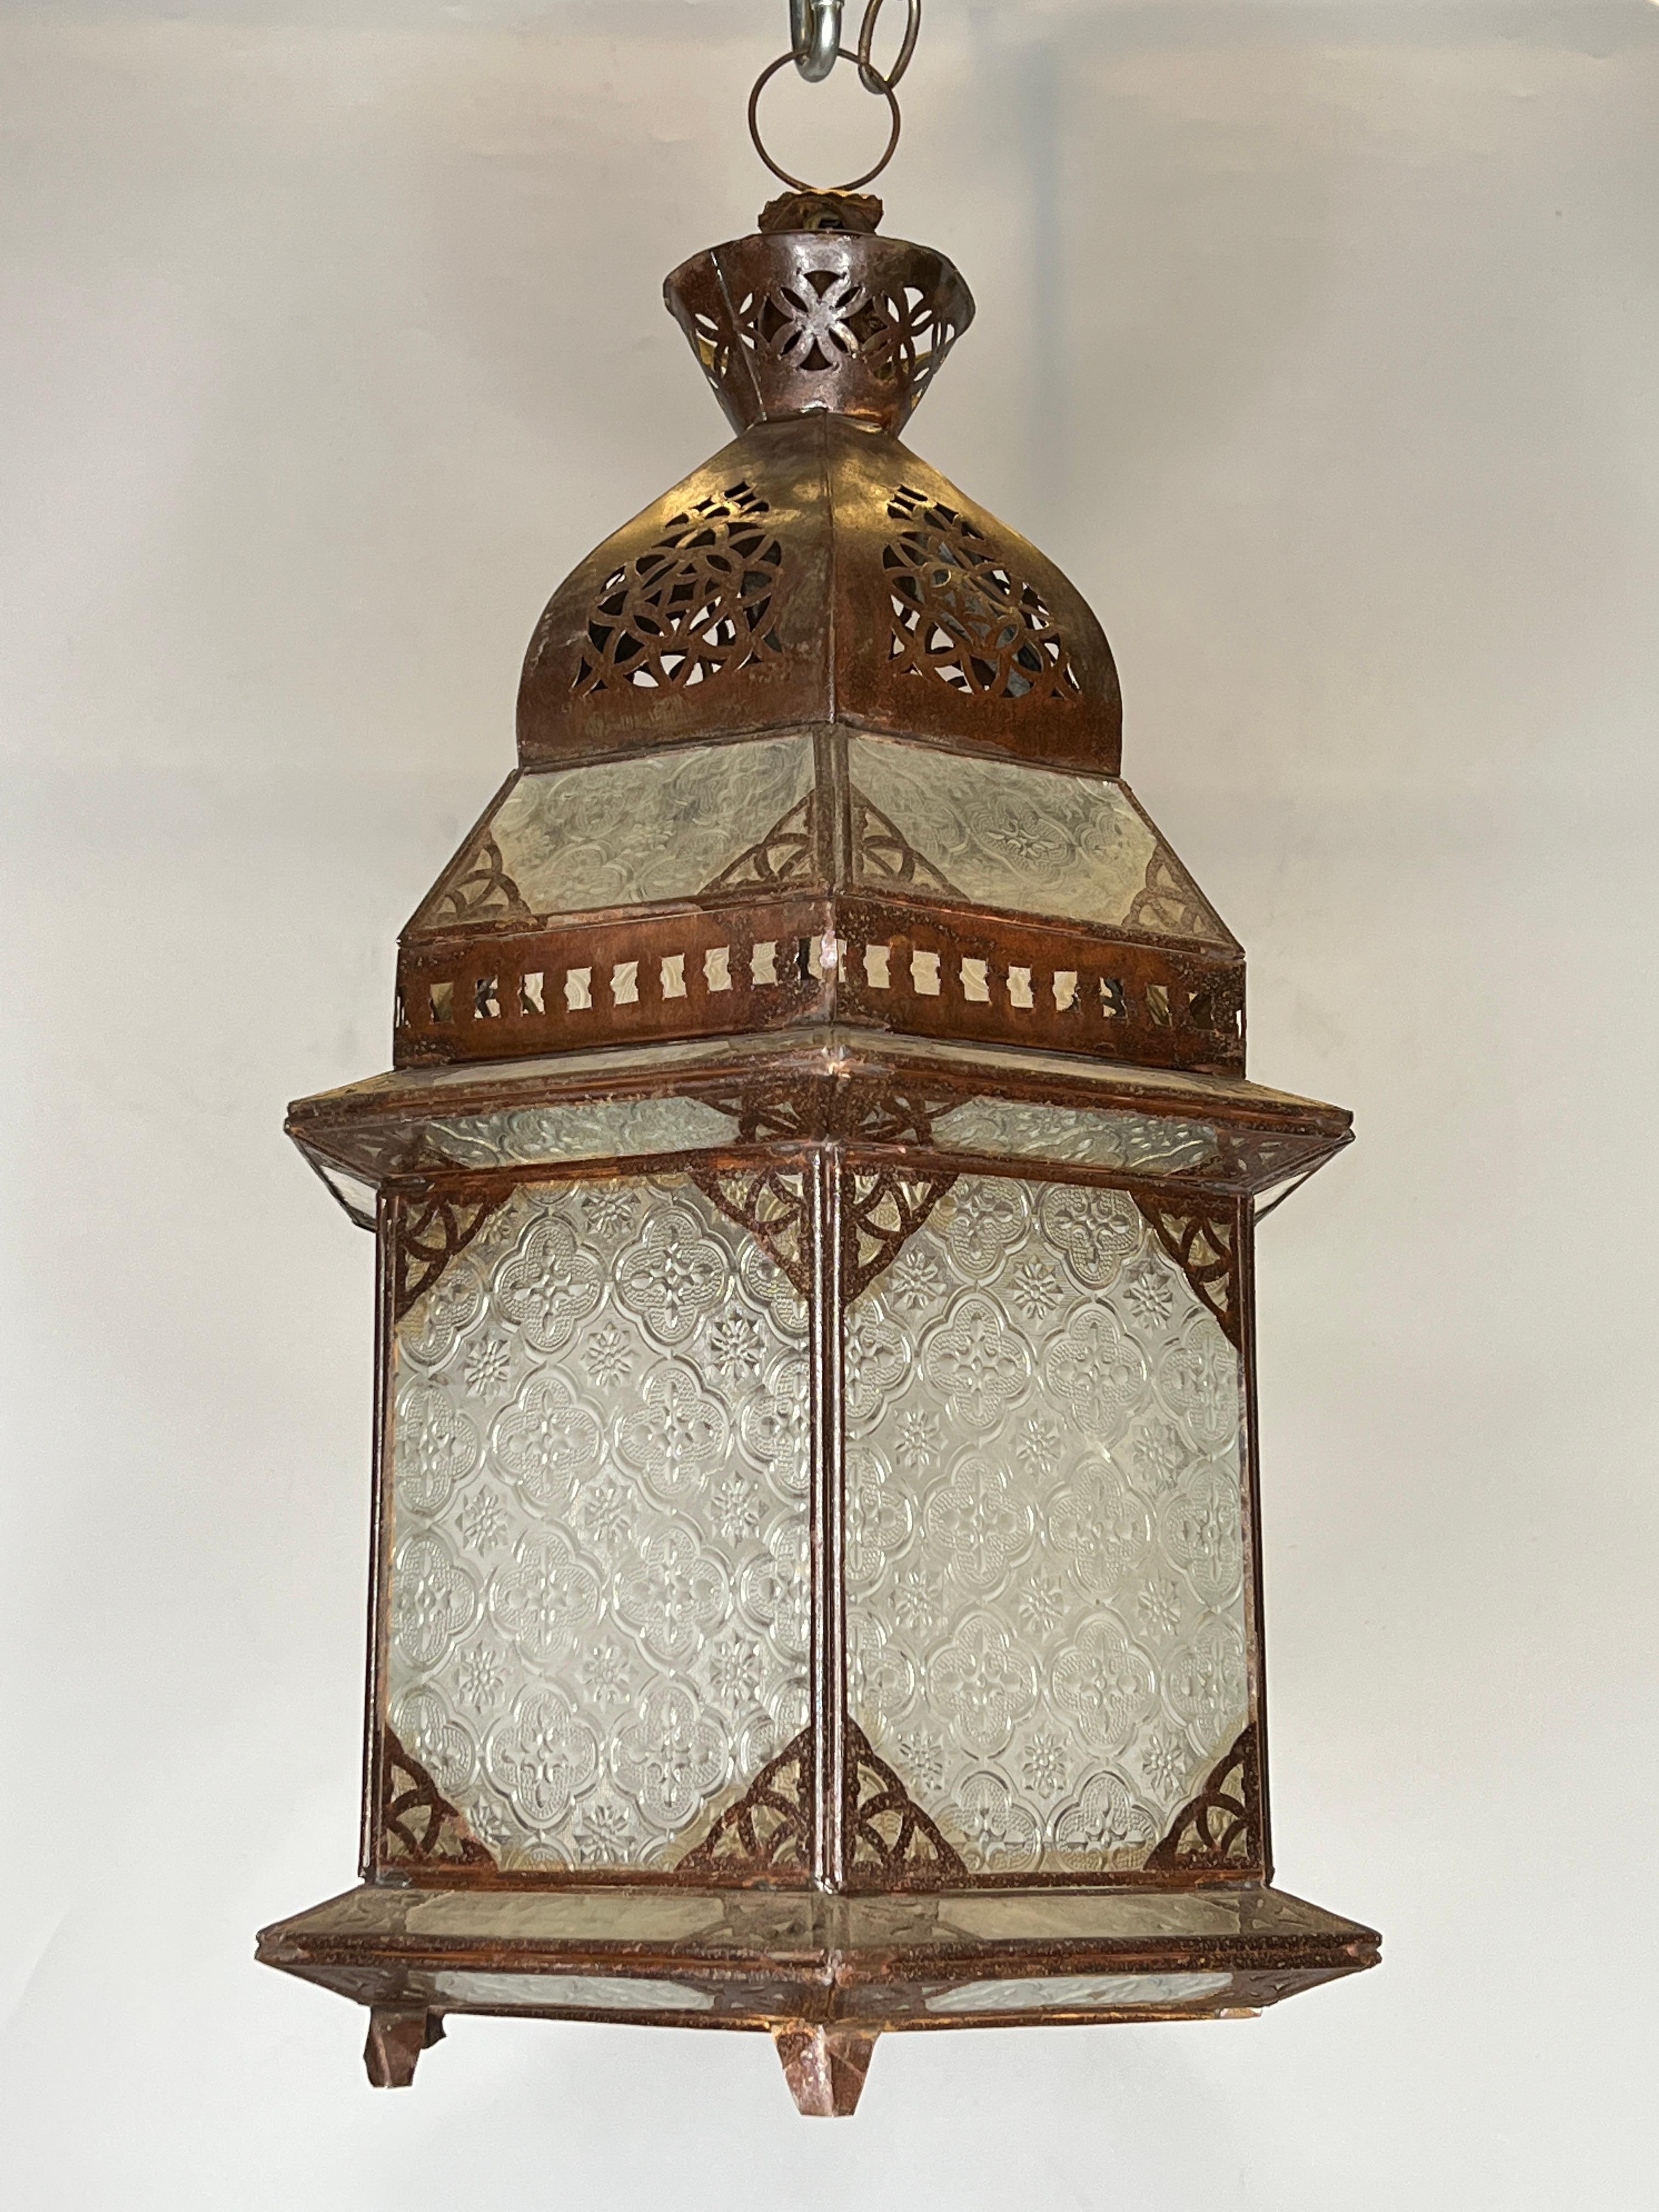 Set of three oriental style metal and glass lanterns, two with ceramic sockets and wiring, one without socket.